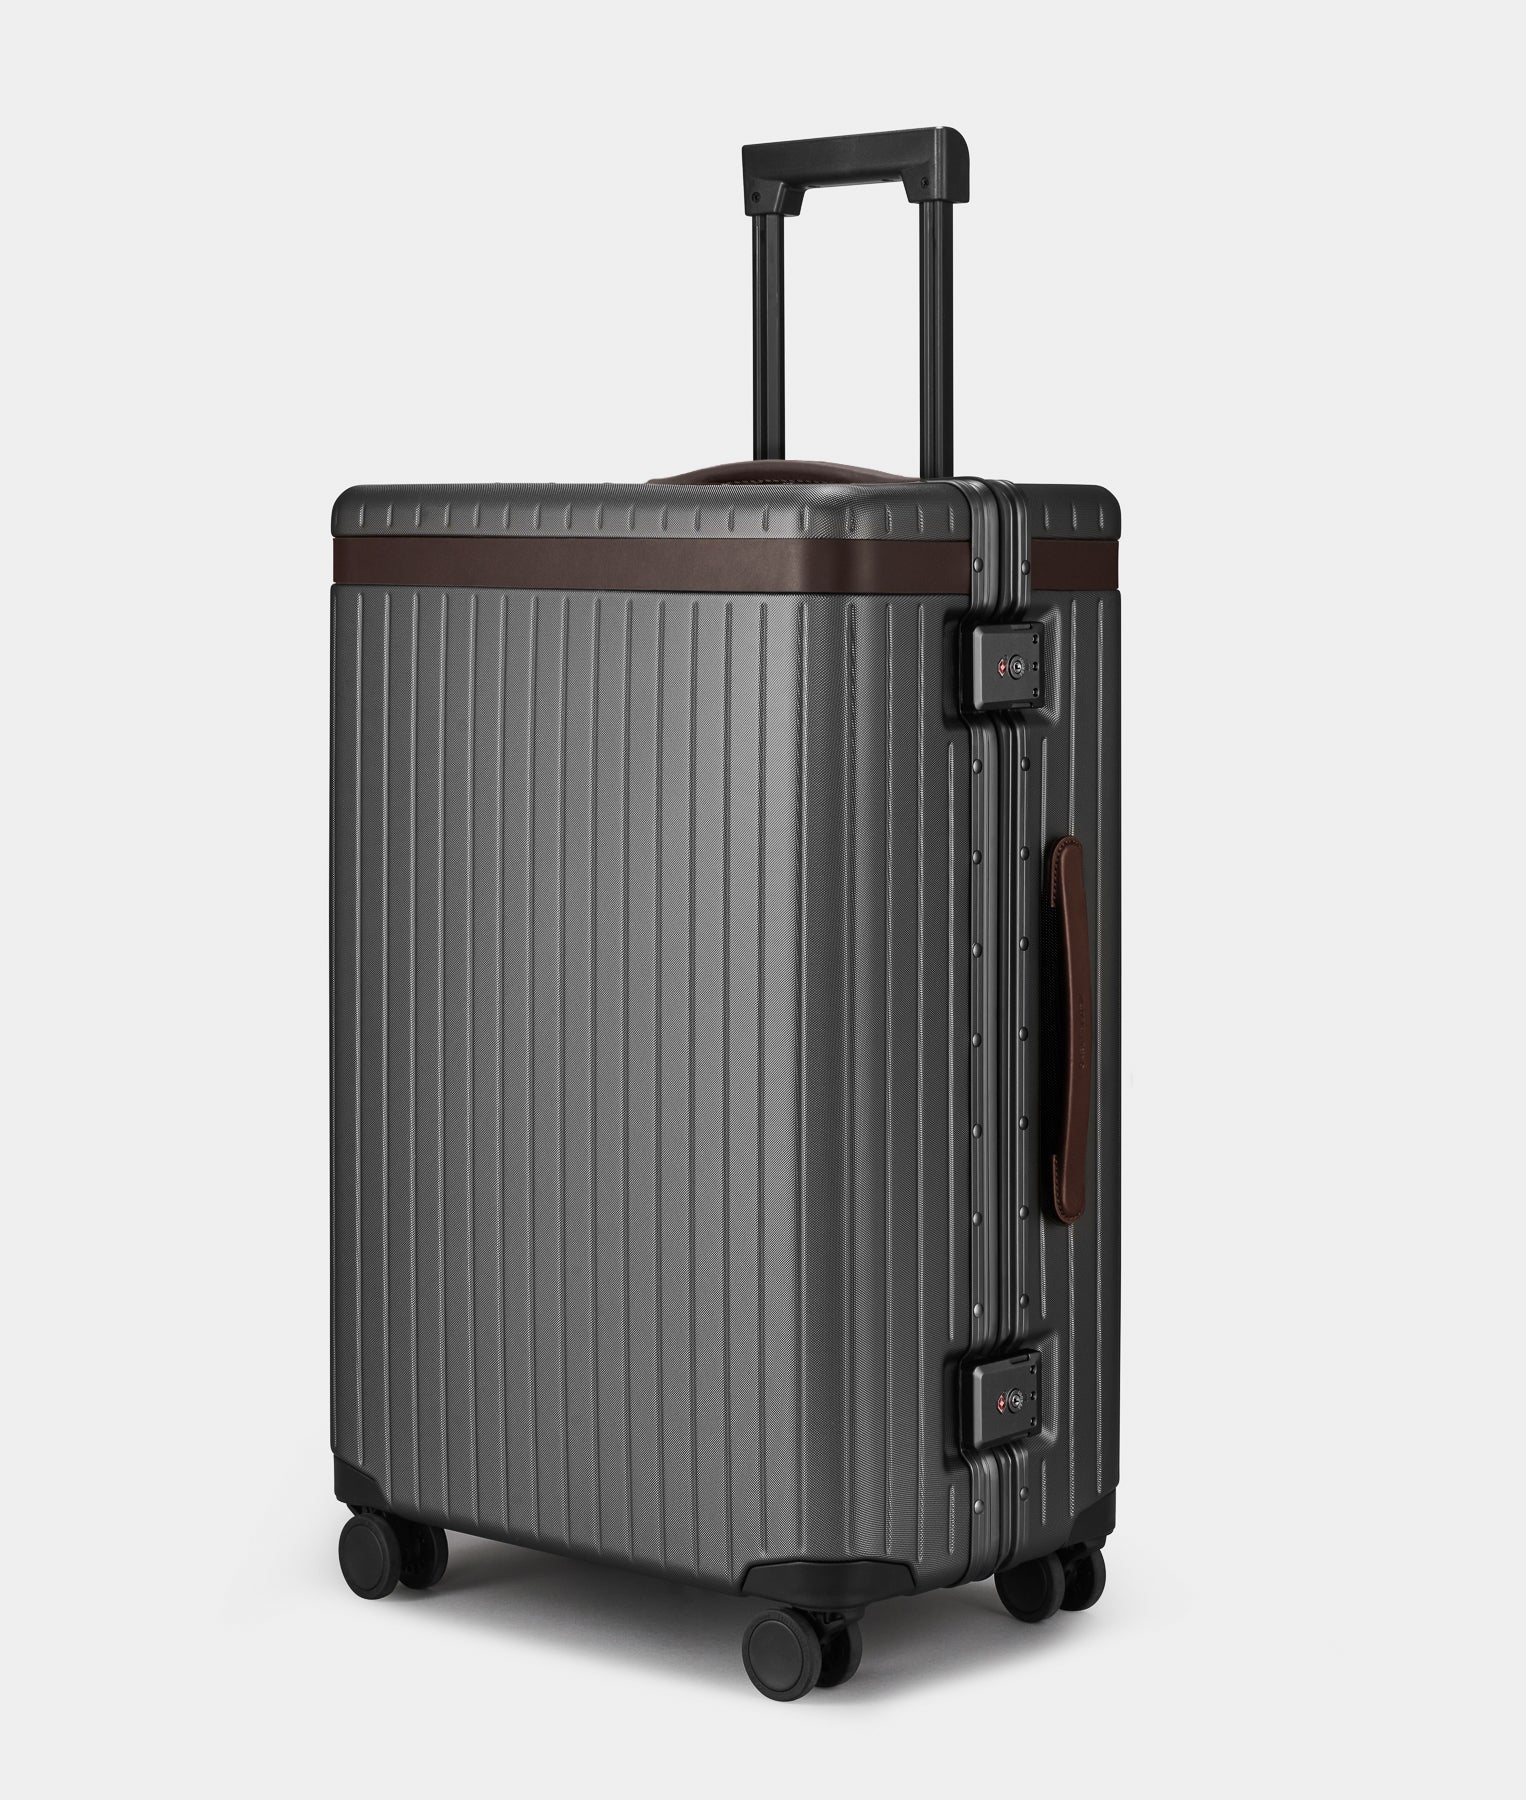 The Check-in - Return Chocolate Large grey polycarbonate suitcase - Good Condition 